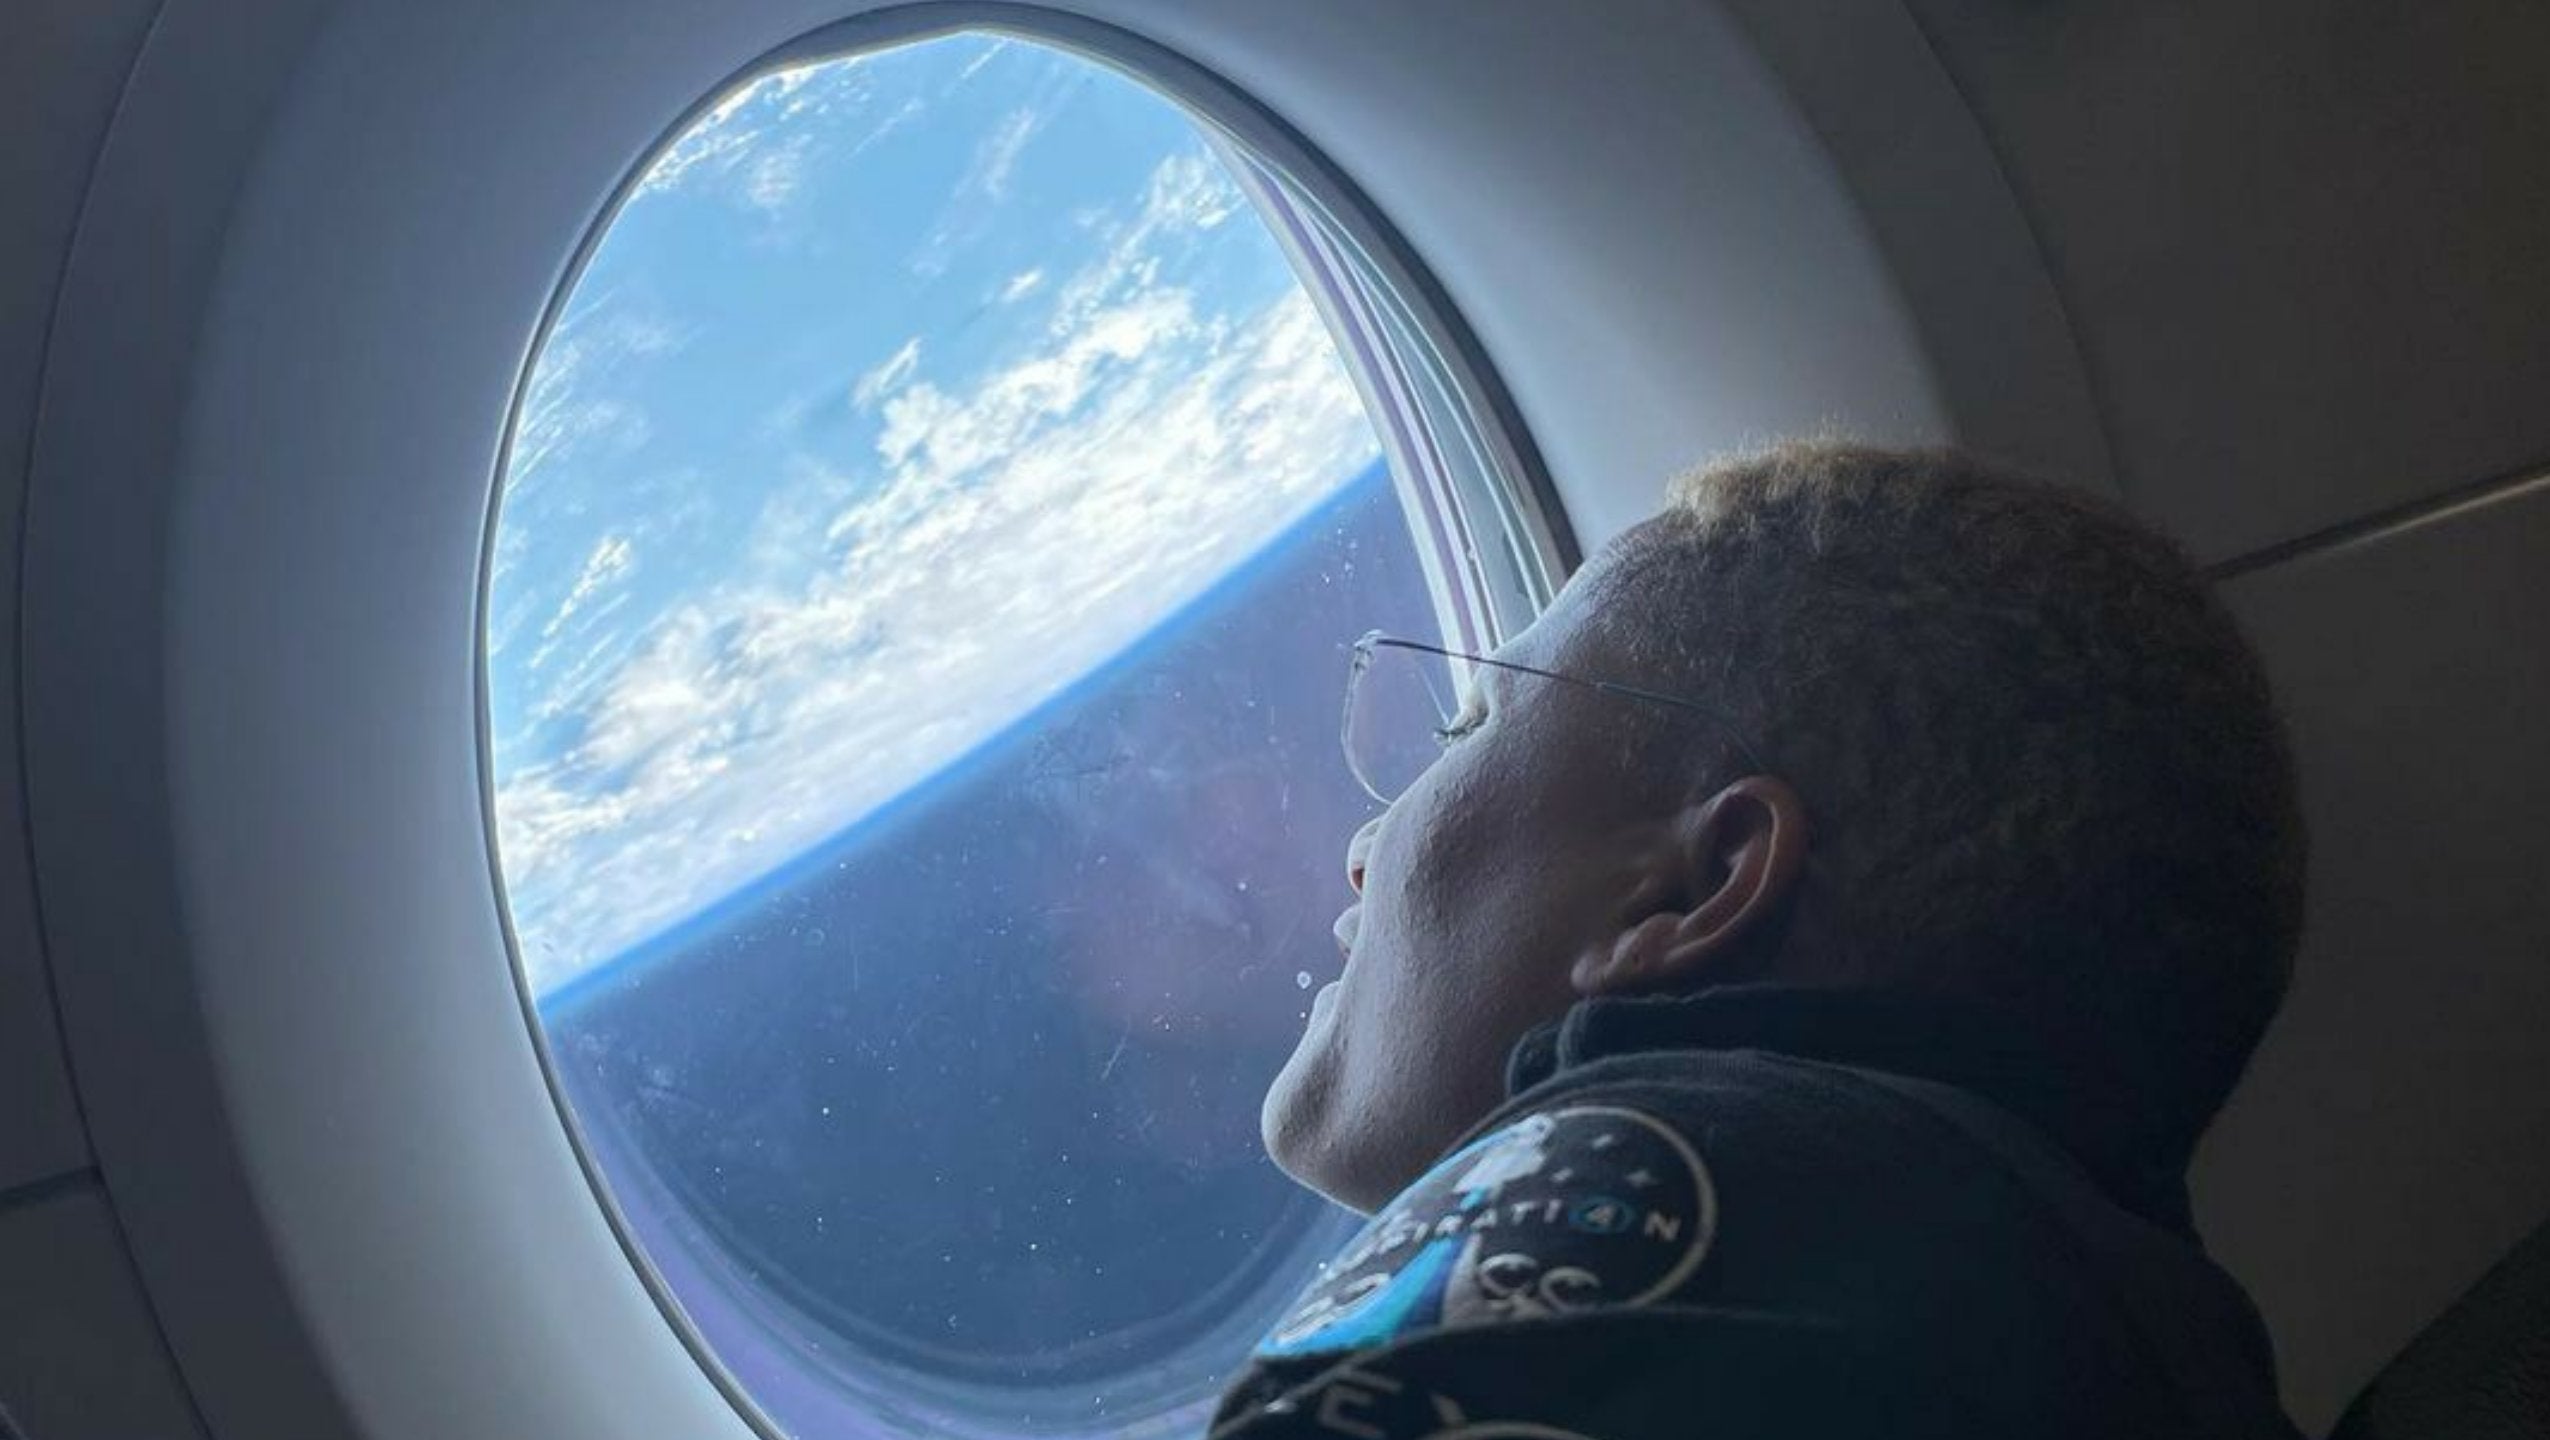 SpaceX Inspiration4 Pilot Dr. Sian Proctor Shares Amazing Video Reading A Poem While Orbiting Earth